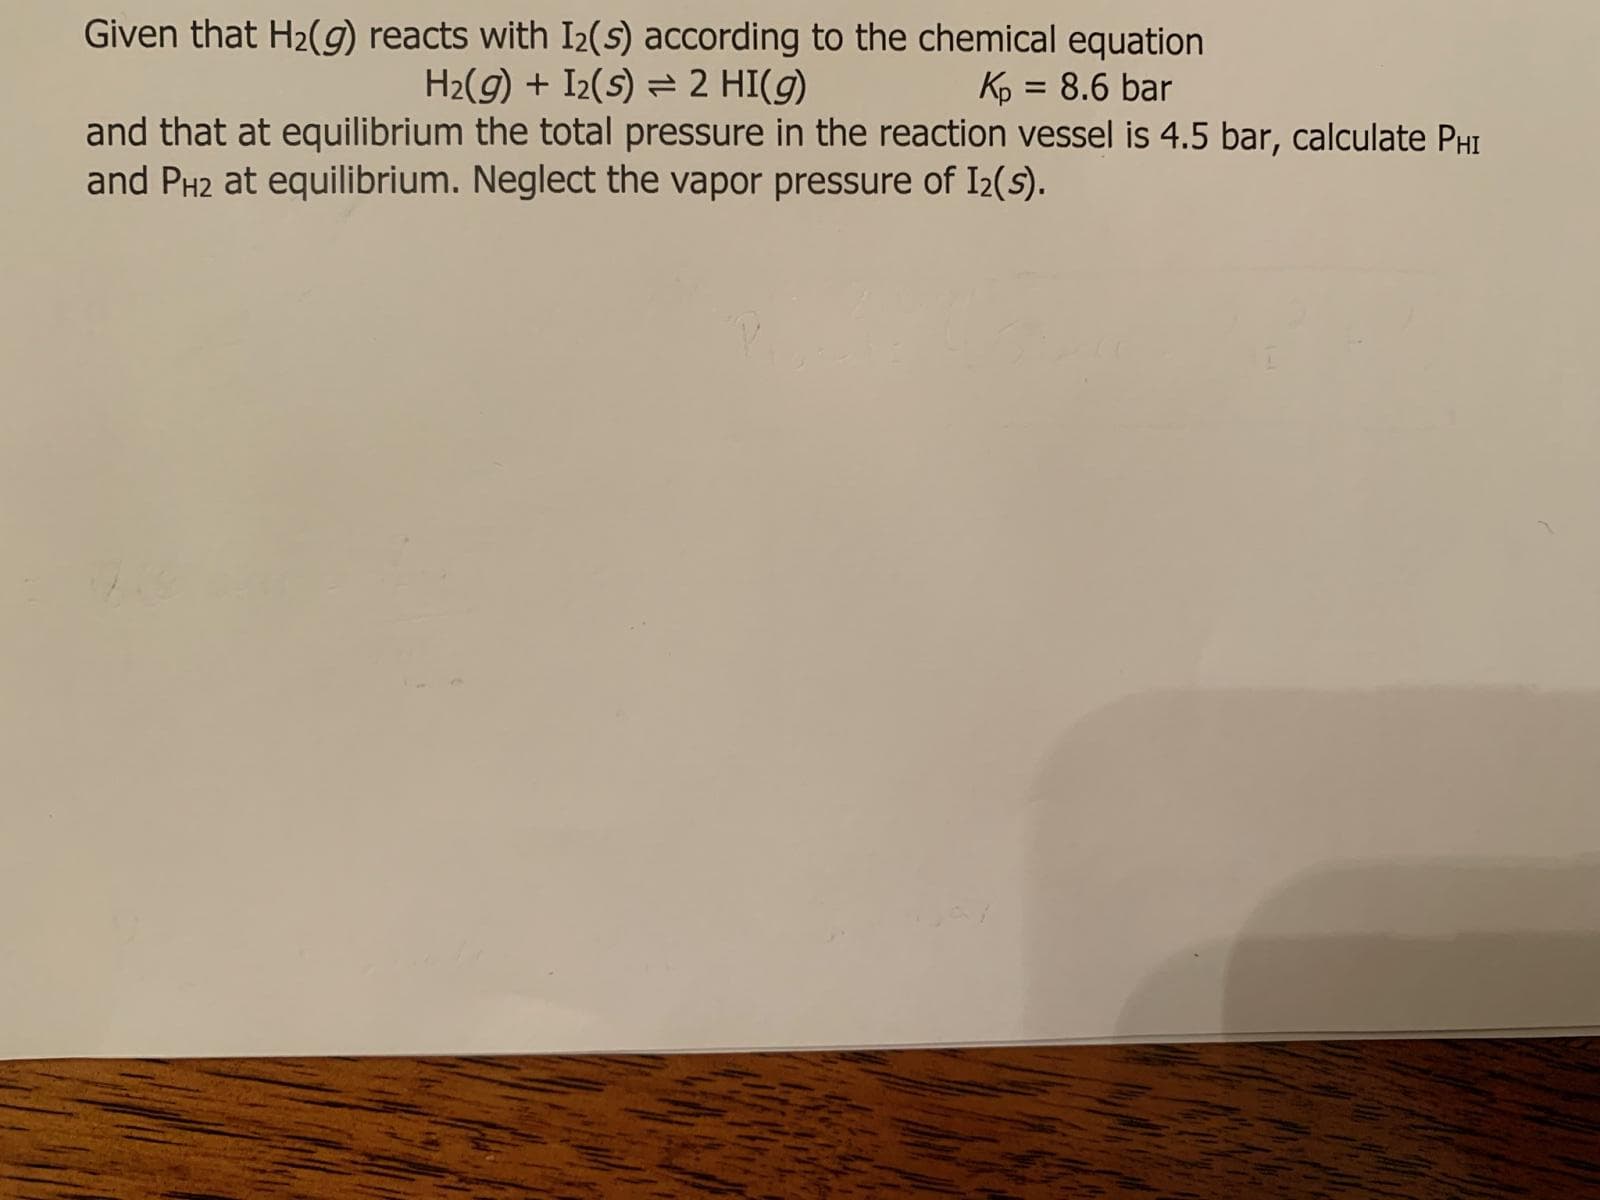 Given that H2(9) reacts with I2(s) according to the chemical equation
H2(g) + I2(s) = 2 HI(g)
Kp = 8.6 bar
and that at equilibrium the total pressure in the reaction vessel is 4.5 bar, calculate PHI
and PH2 at equilibrium. Neglect the vapor pressure of I2(s).
